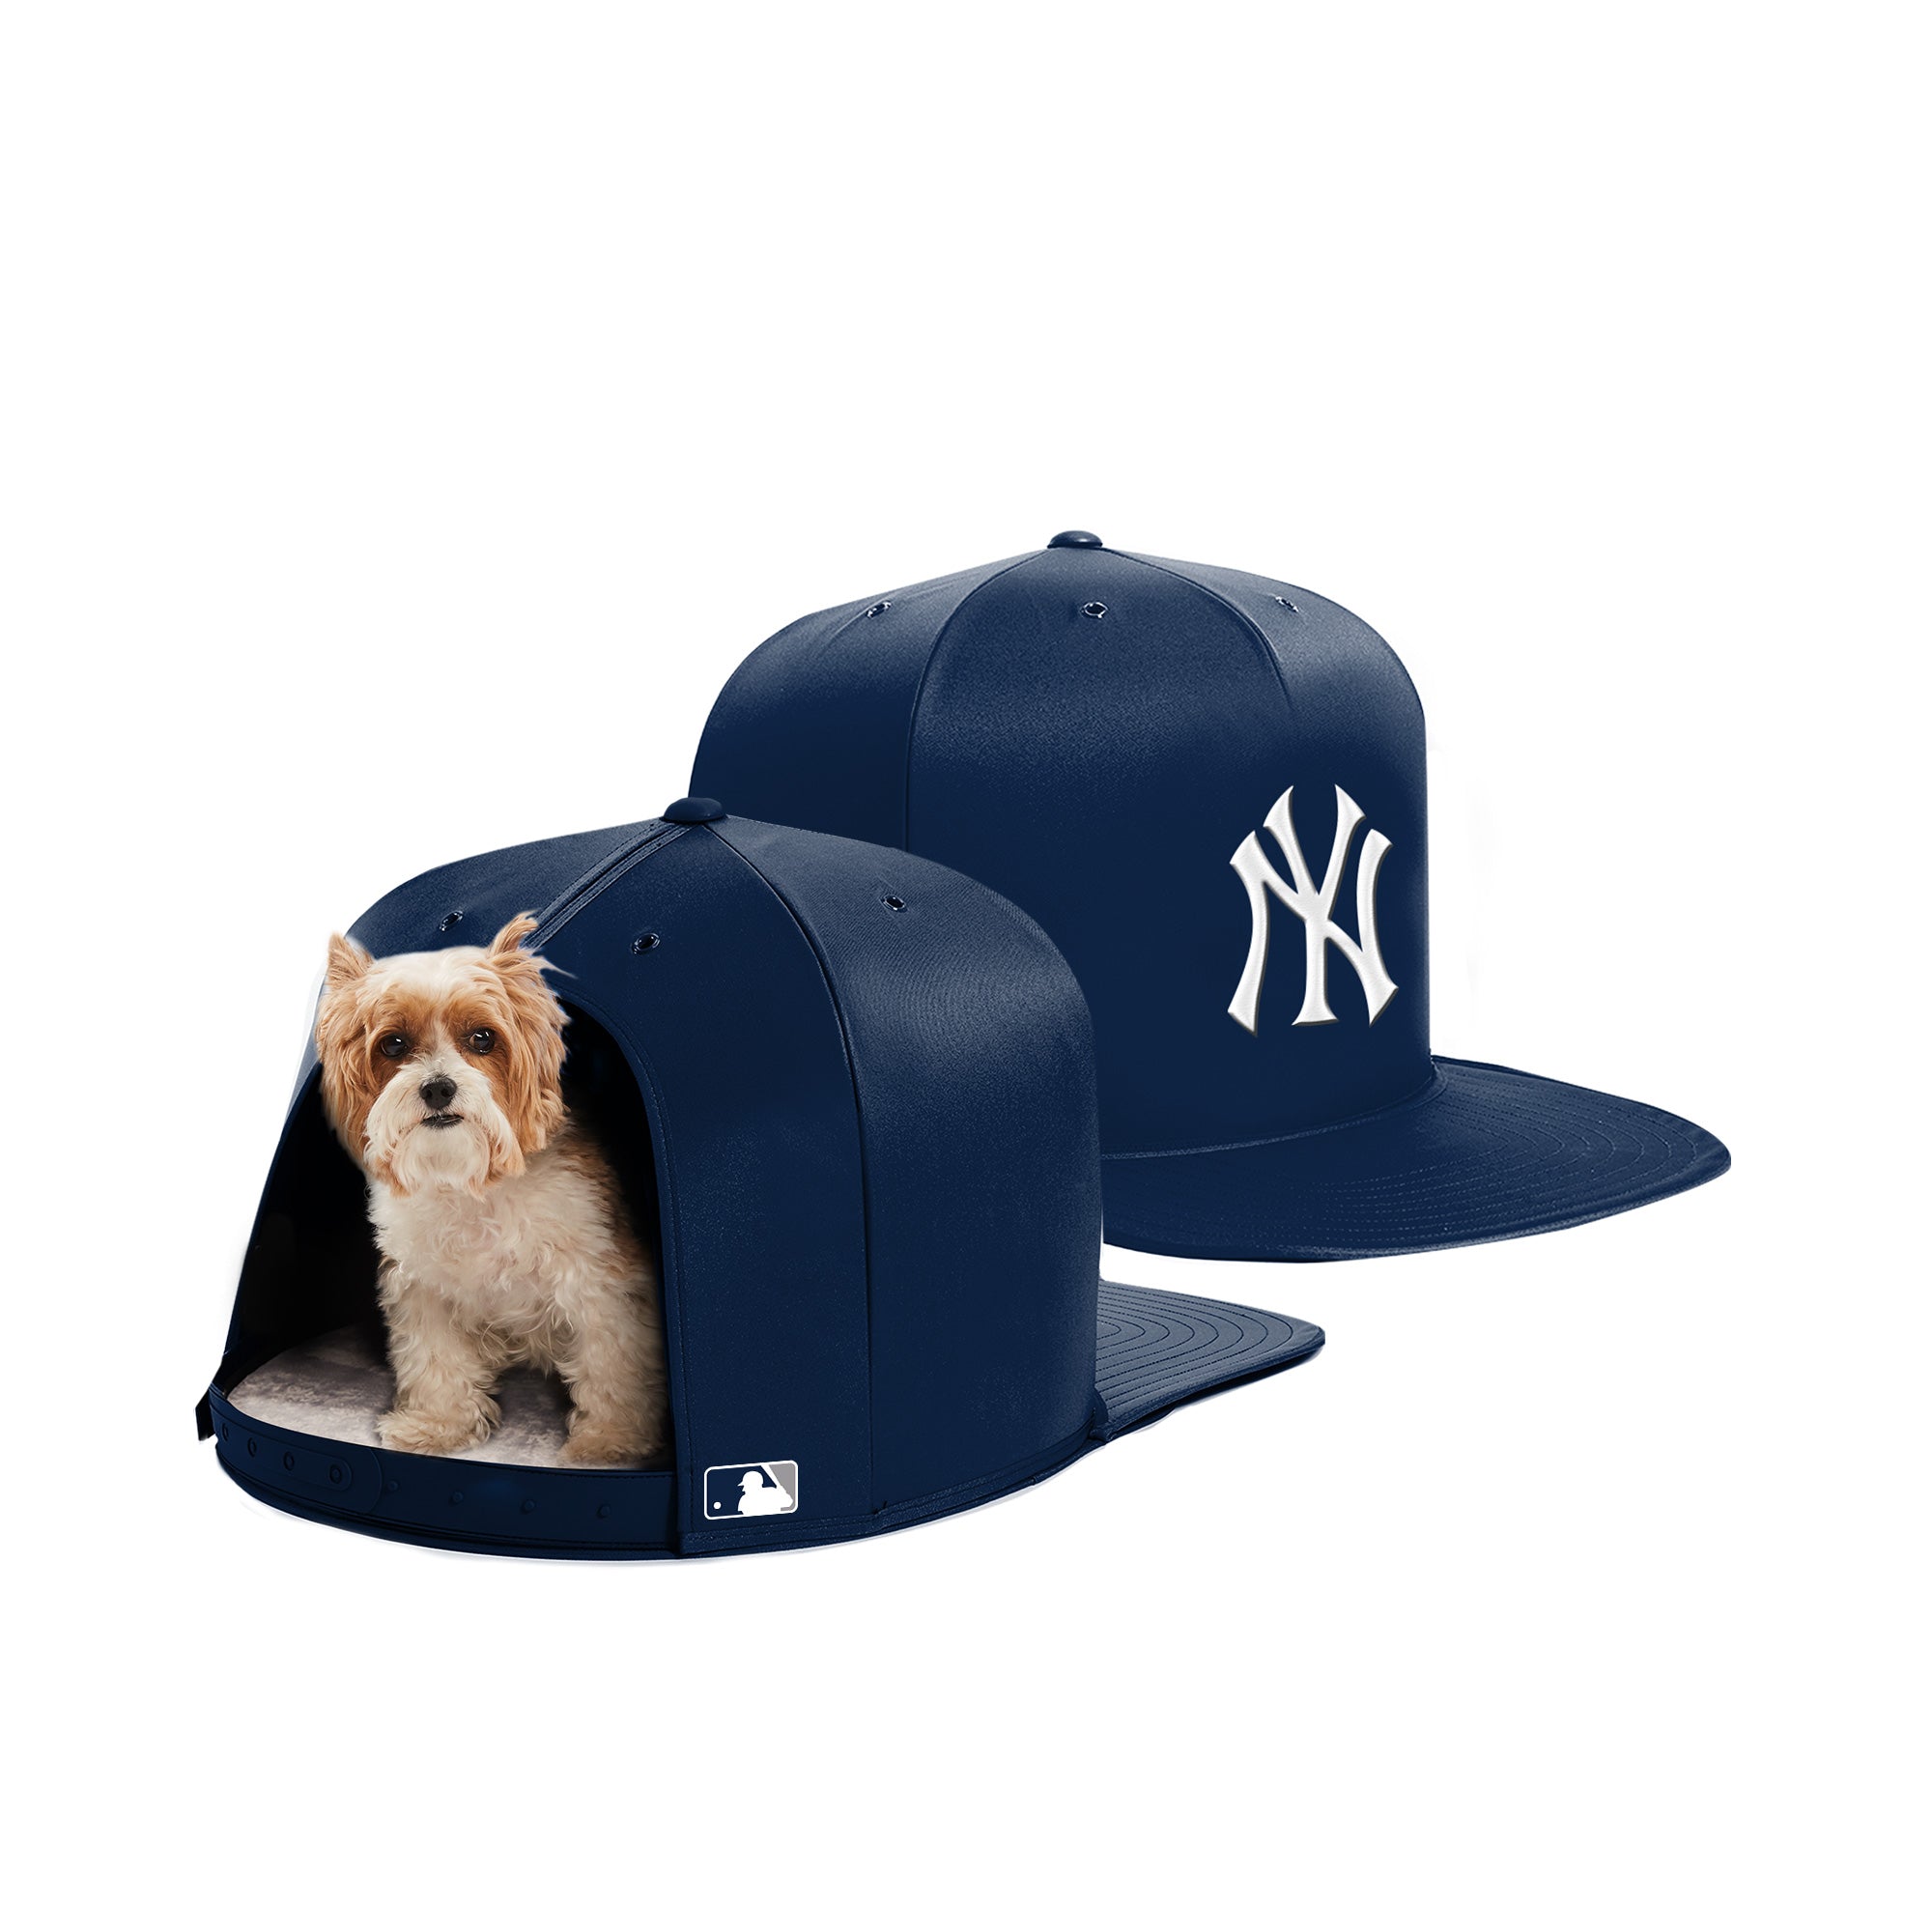 dog with yankee hat